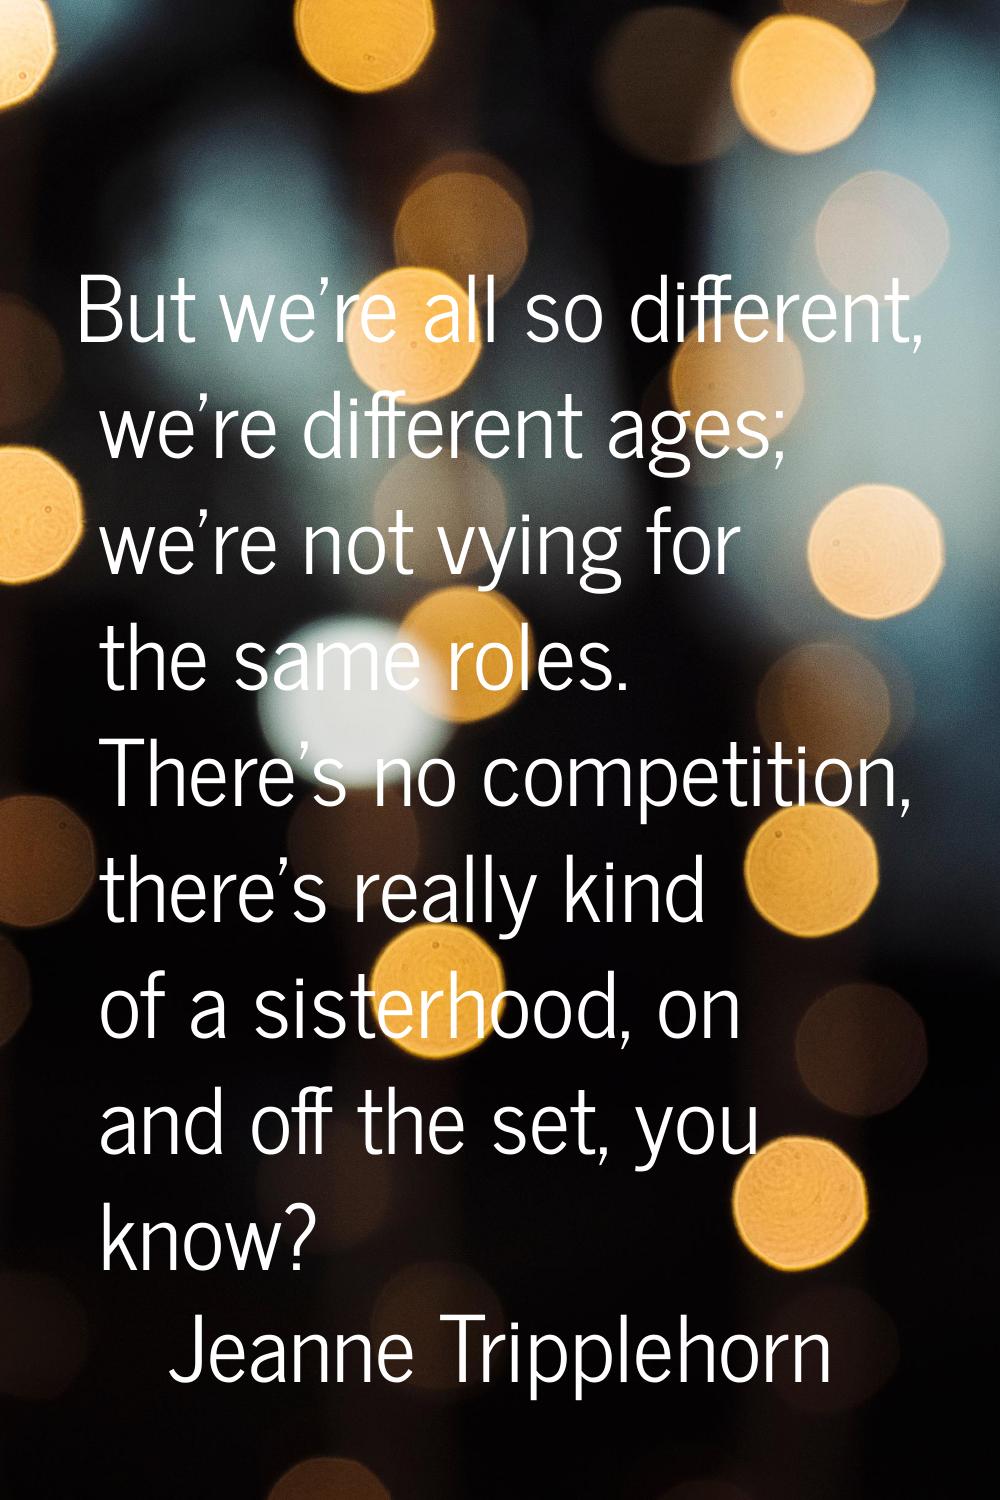 But we're all so different, we're different ages; we're not vying for the same roles. There's no co